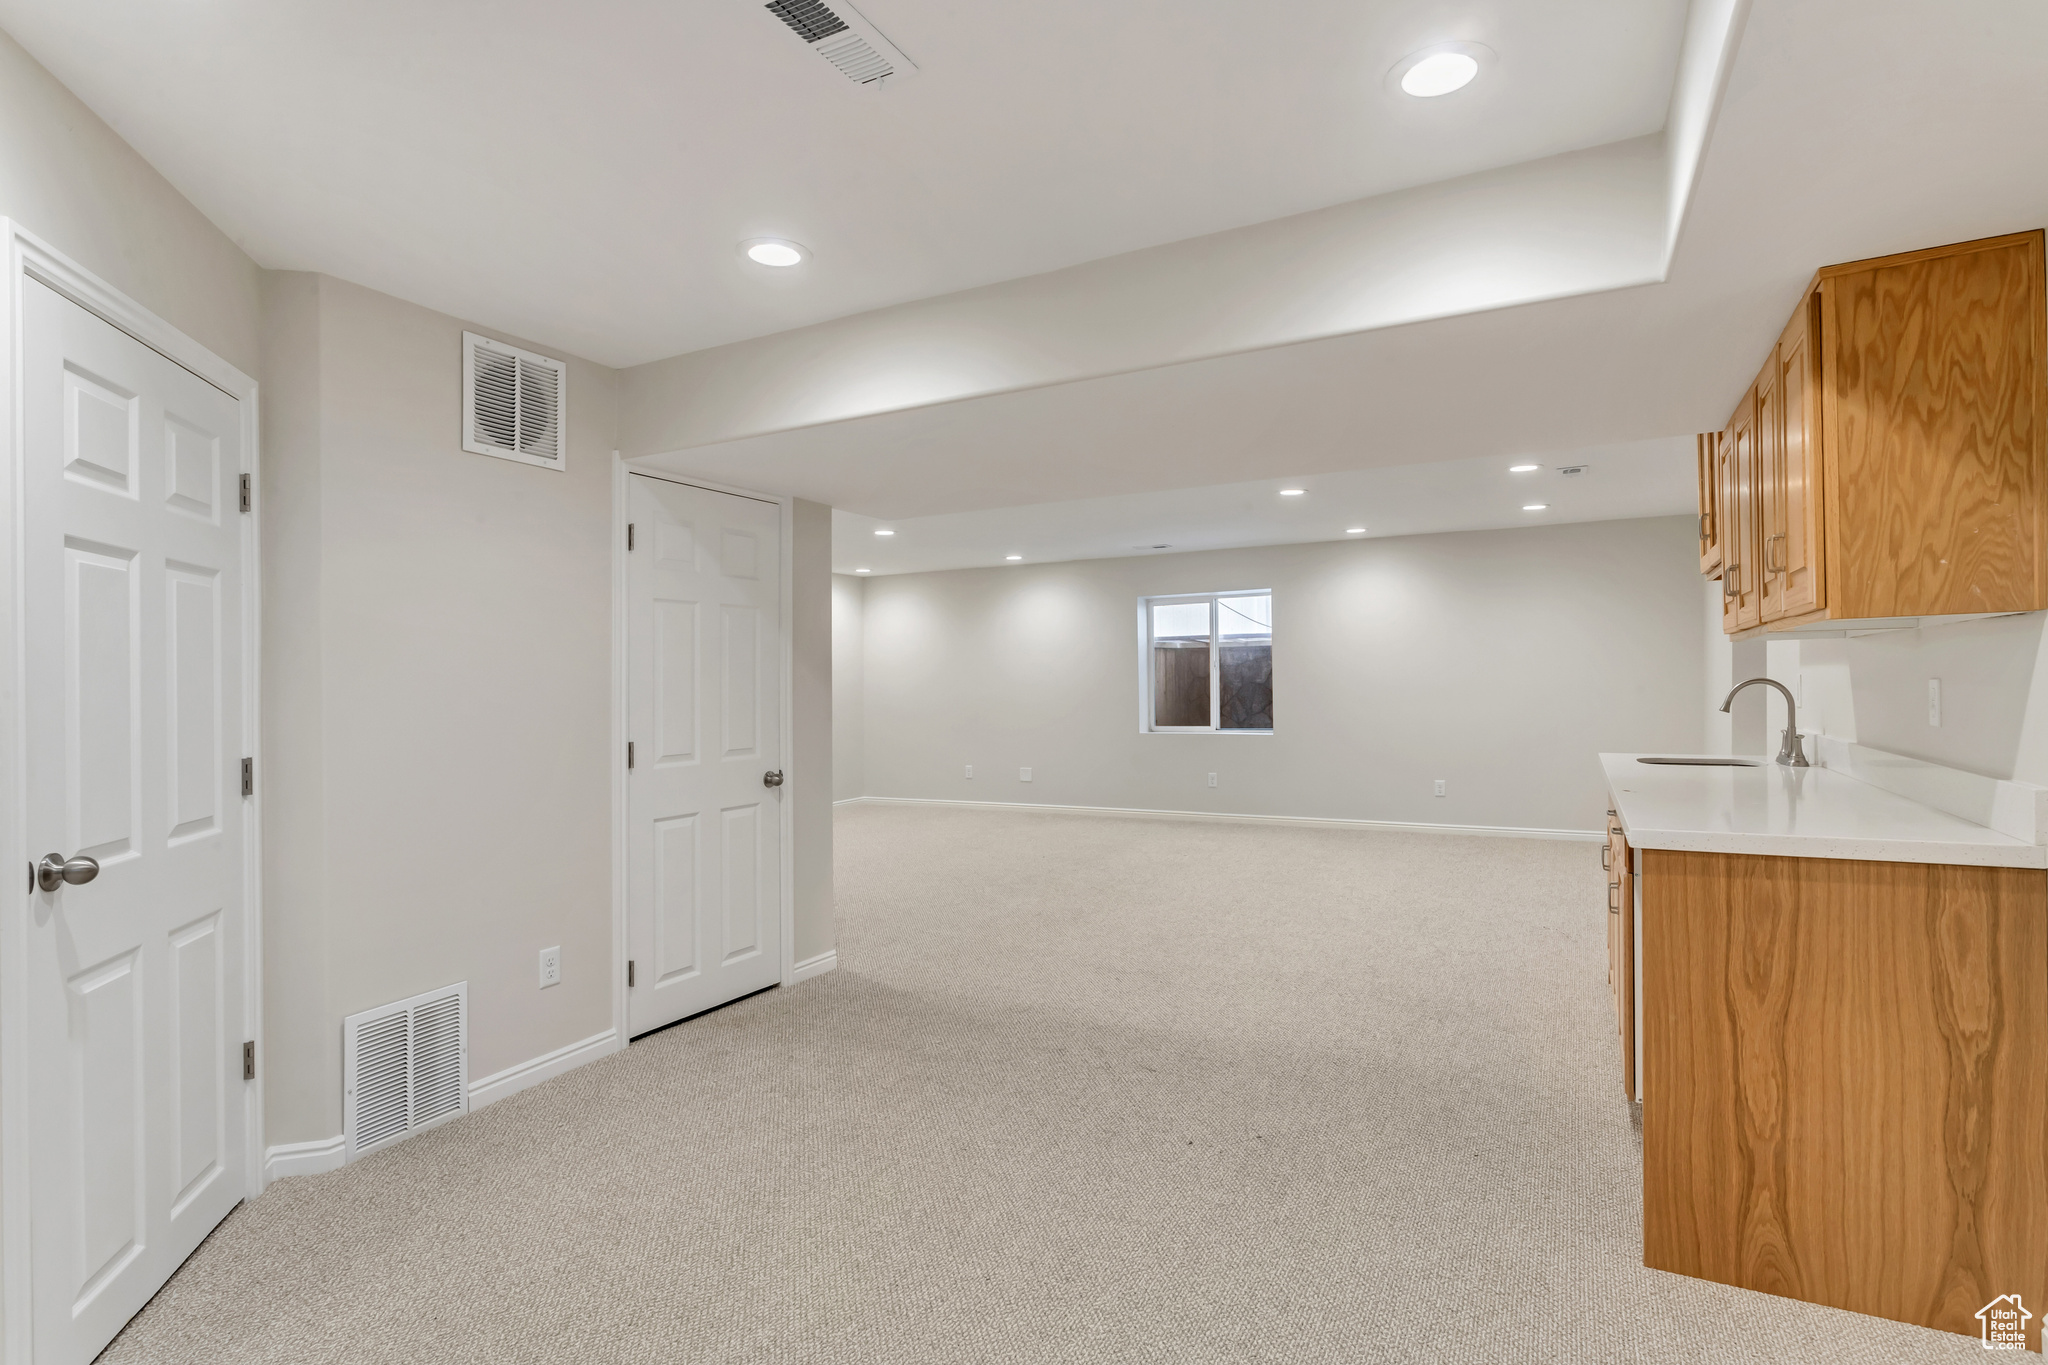 Huge family room in basement with kitchenette and all new carpet. Perfect space for guests, entertaining, or privacy.